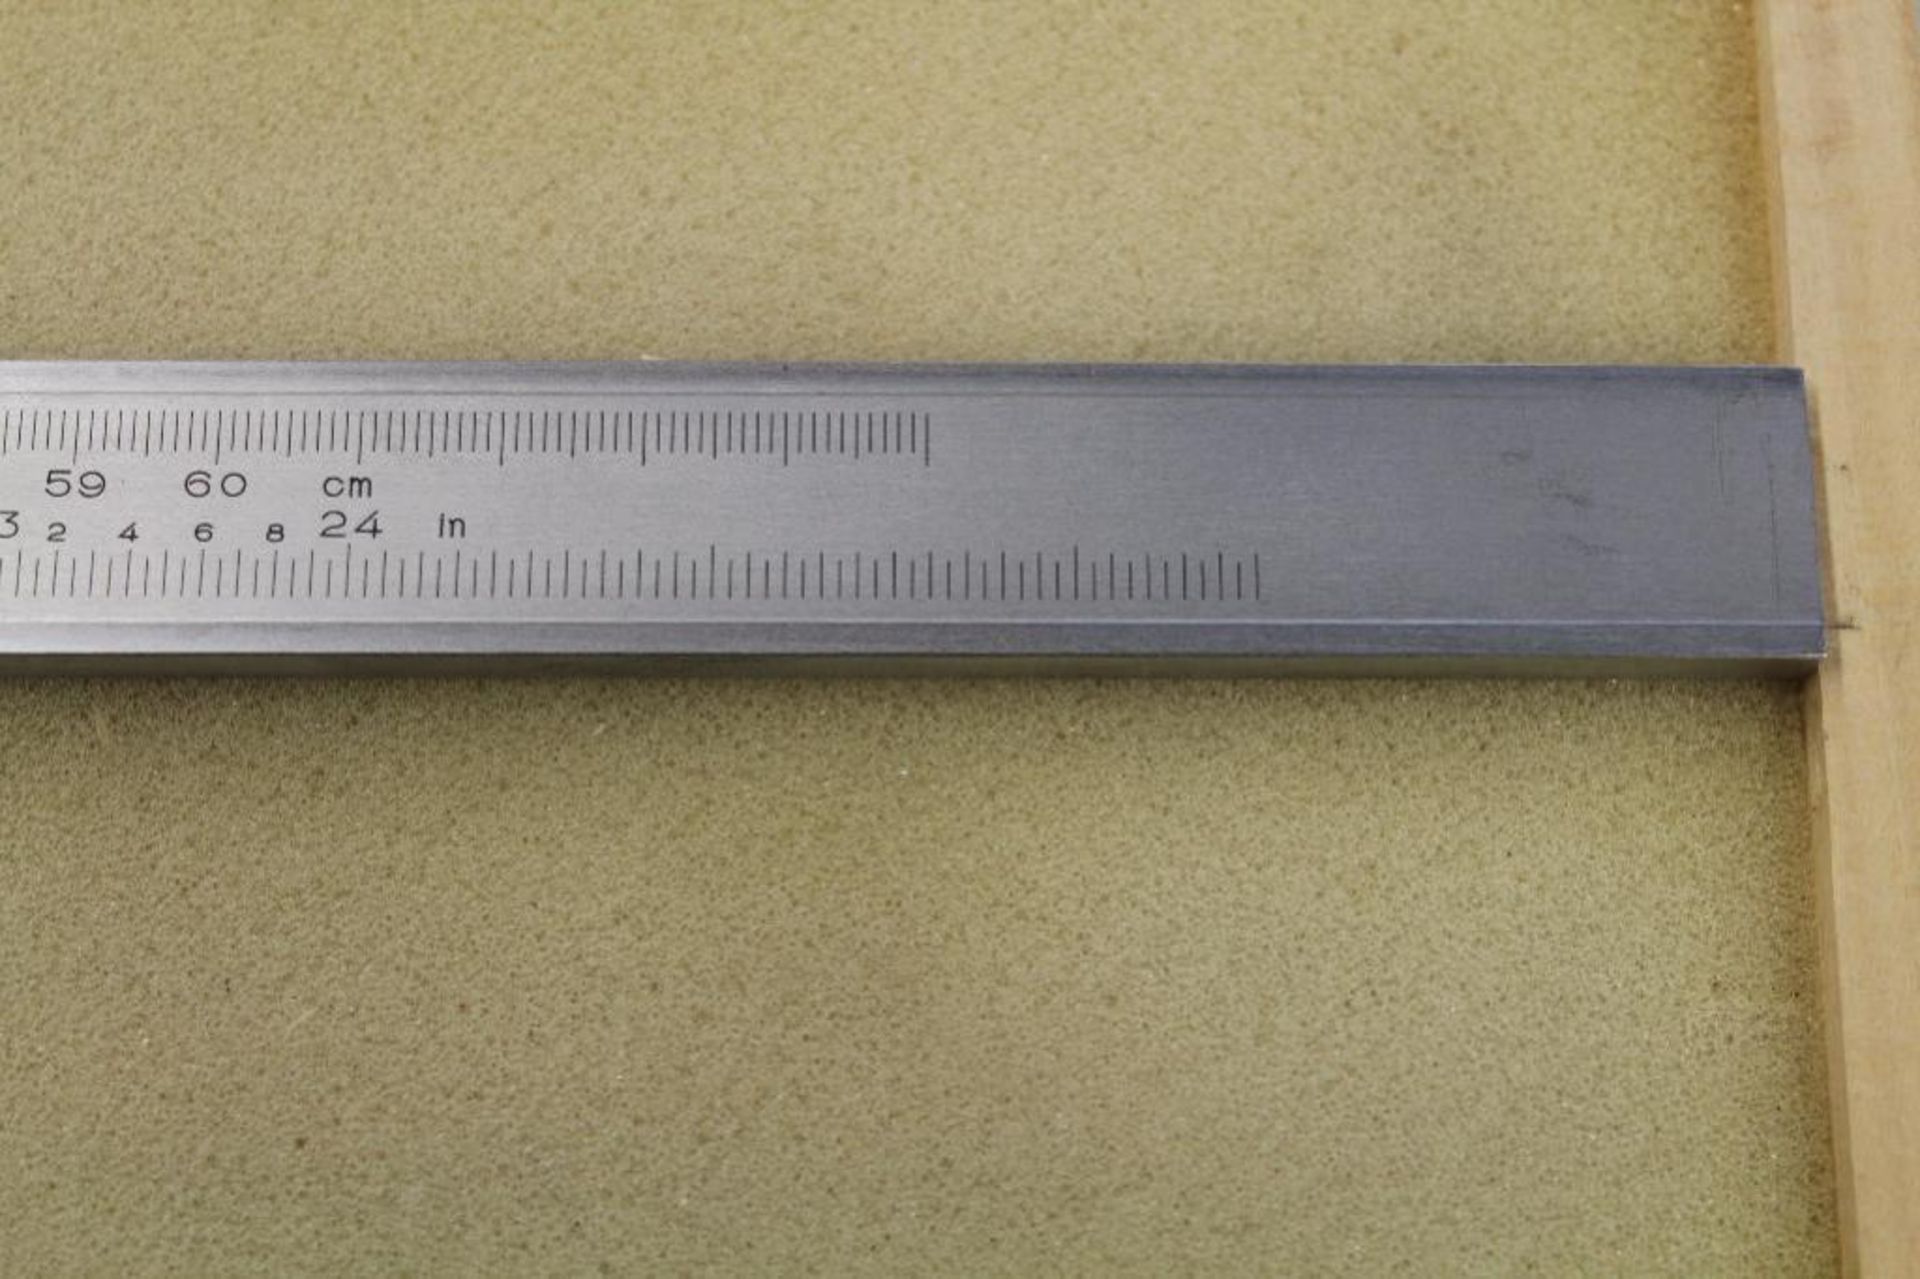 24 inch vernier calipers - Image 4 of 4